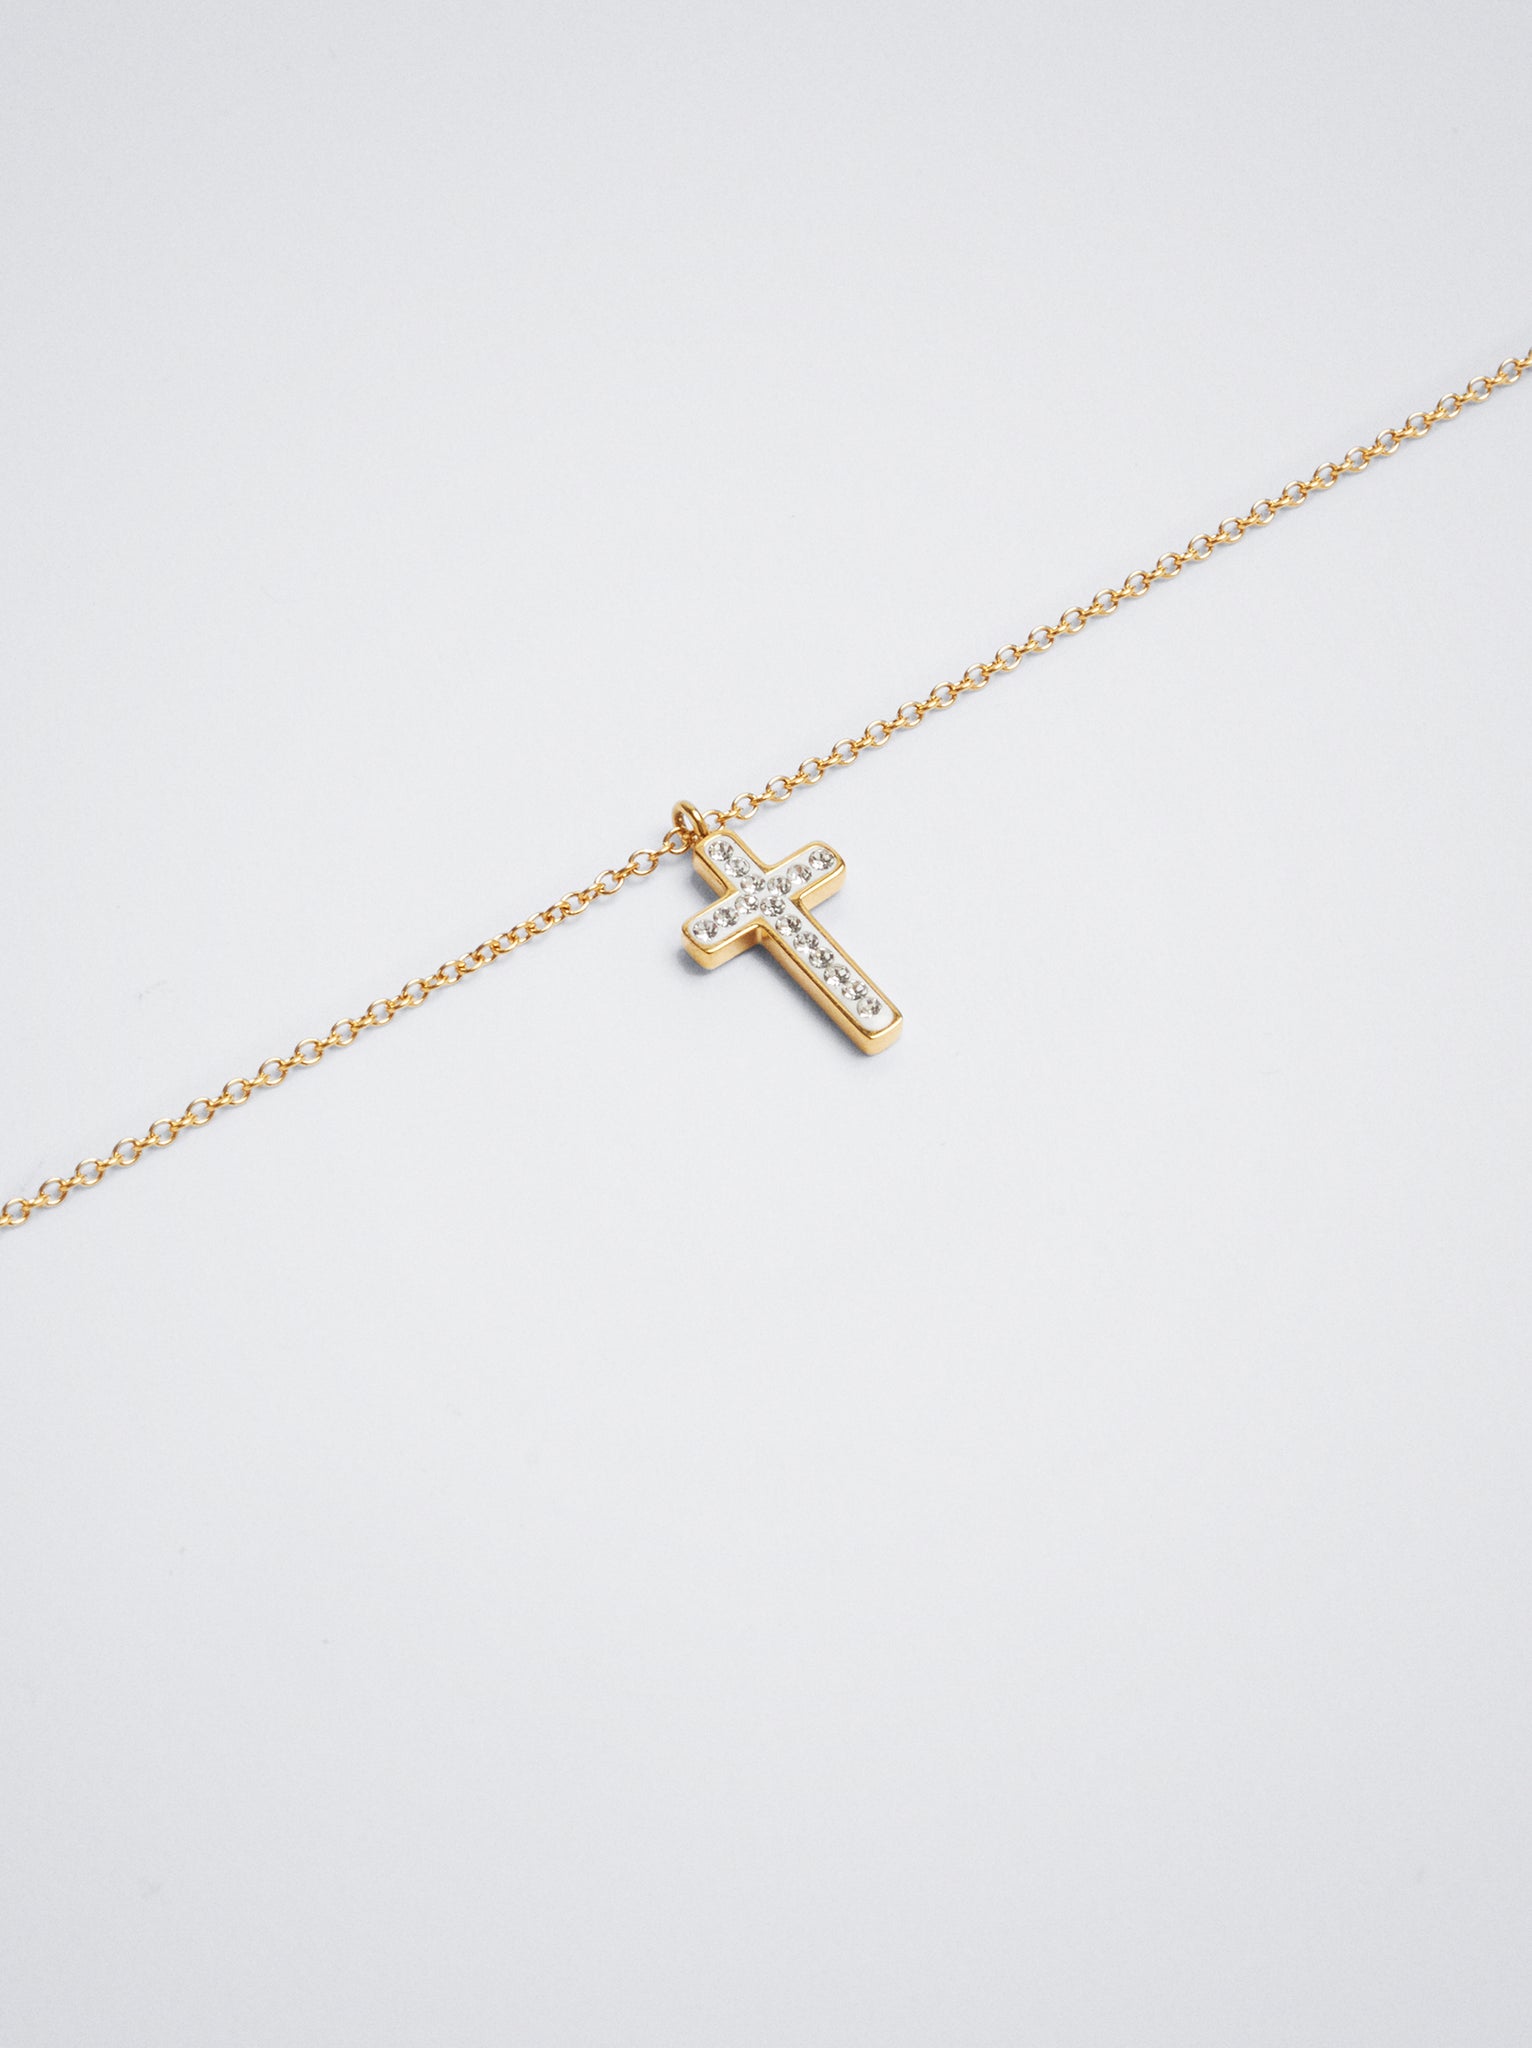 Silver Stainless Steel Necklace With Cross